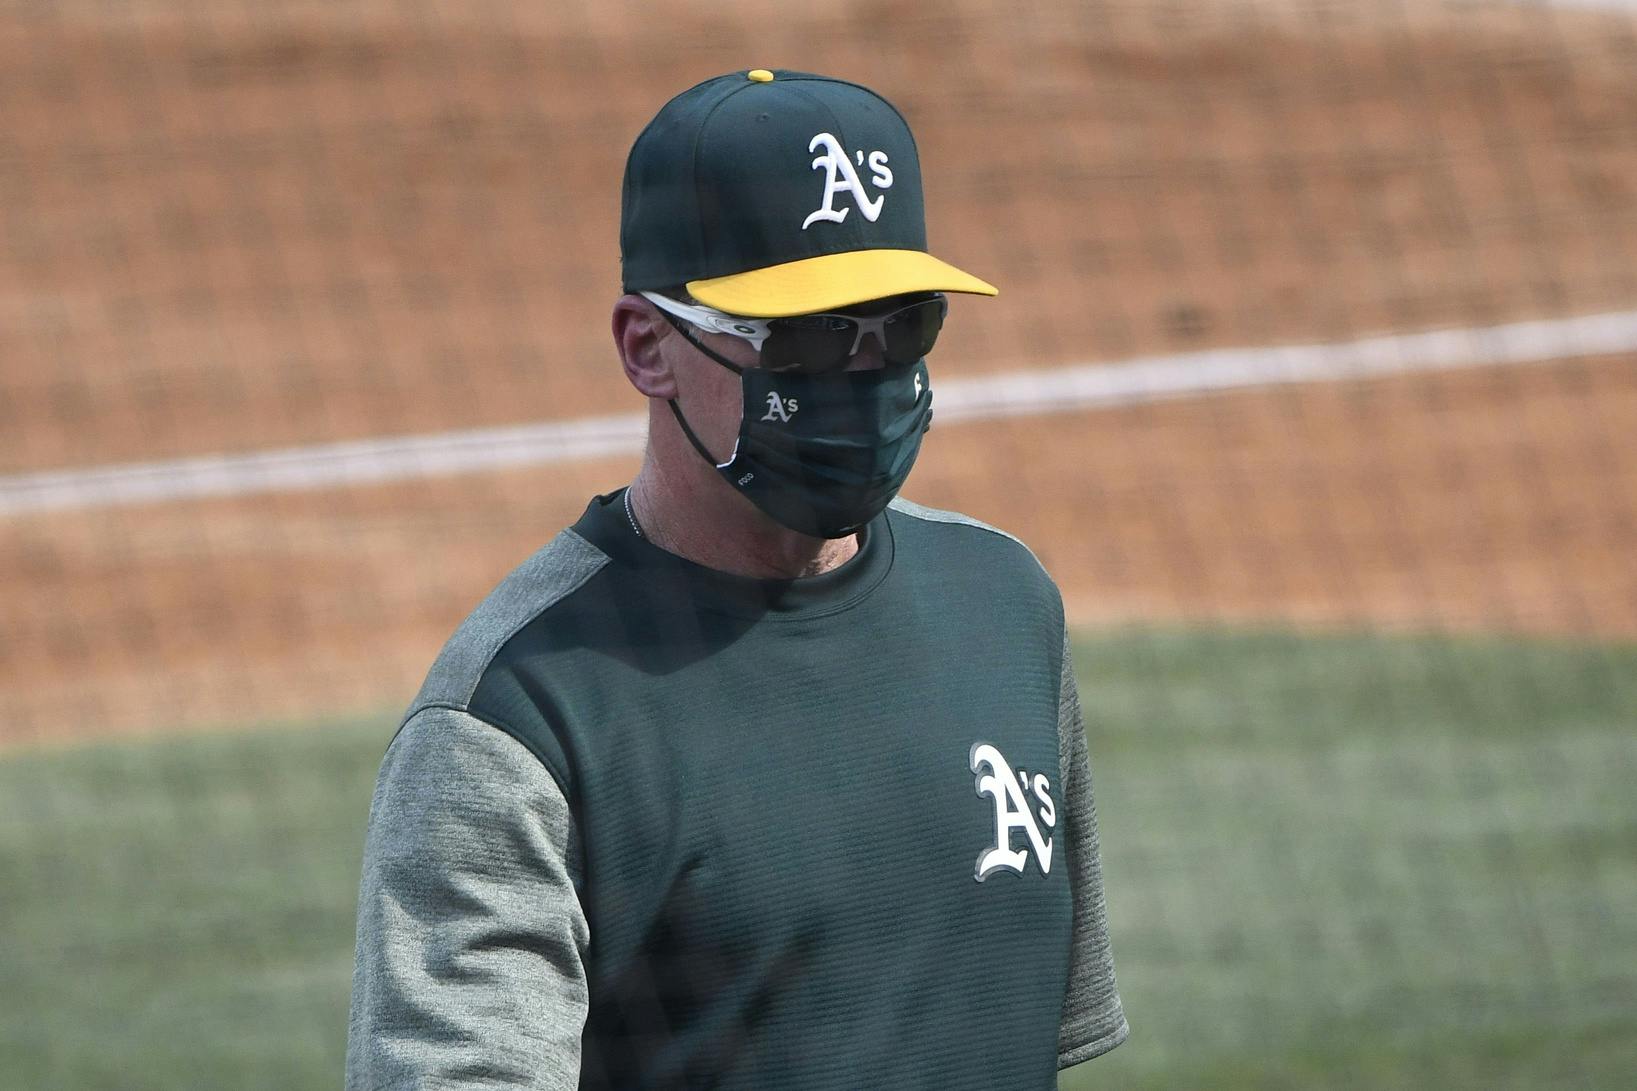 Bob Melvin on his baseball journey, importance of leadership and more